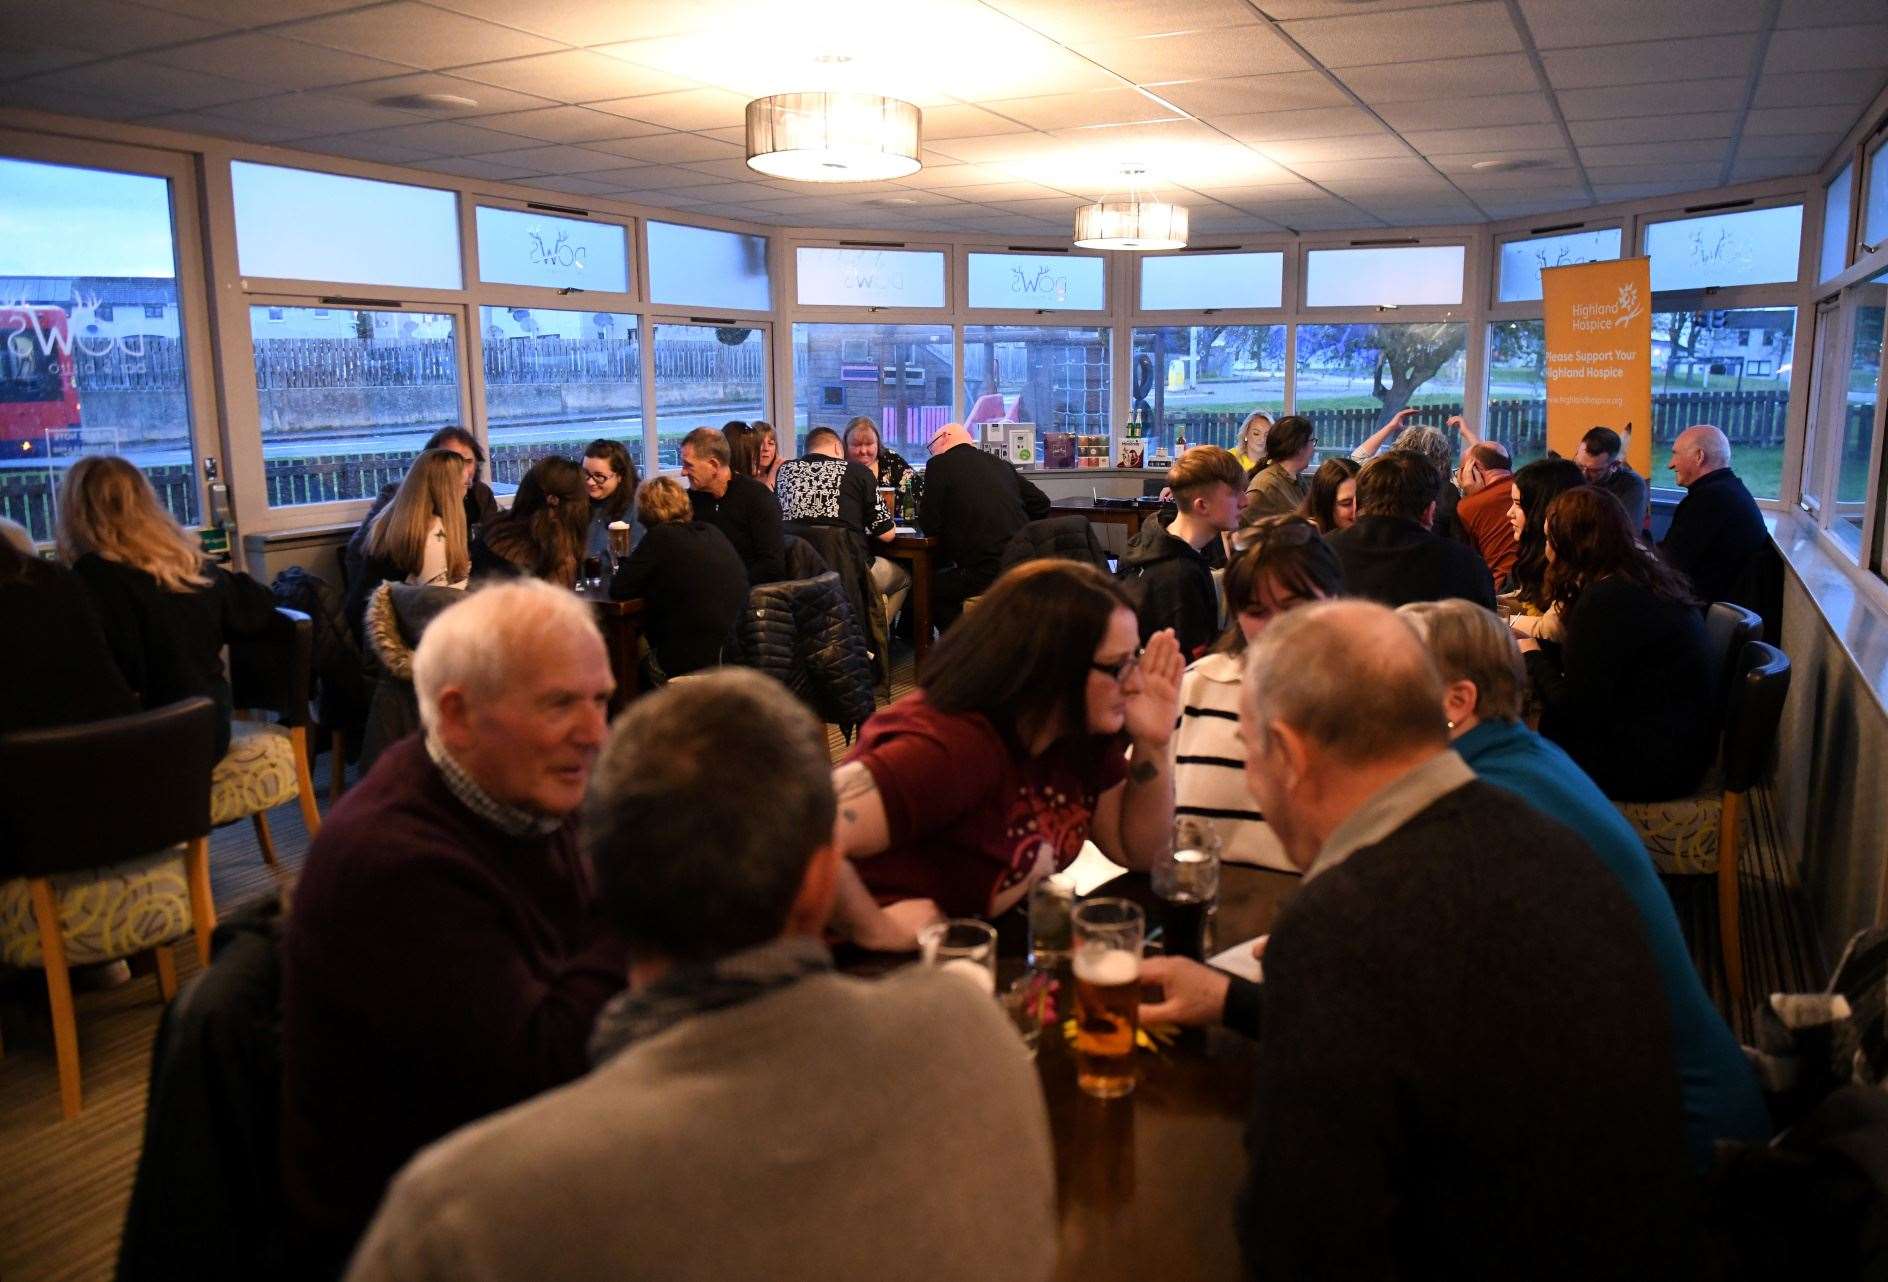 Martin Maclure’s Strictly Quiz Night at Dows Bar and Bistro was a packed affair